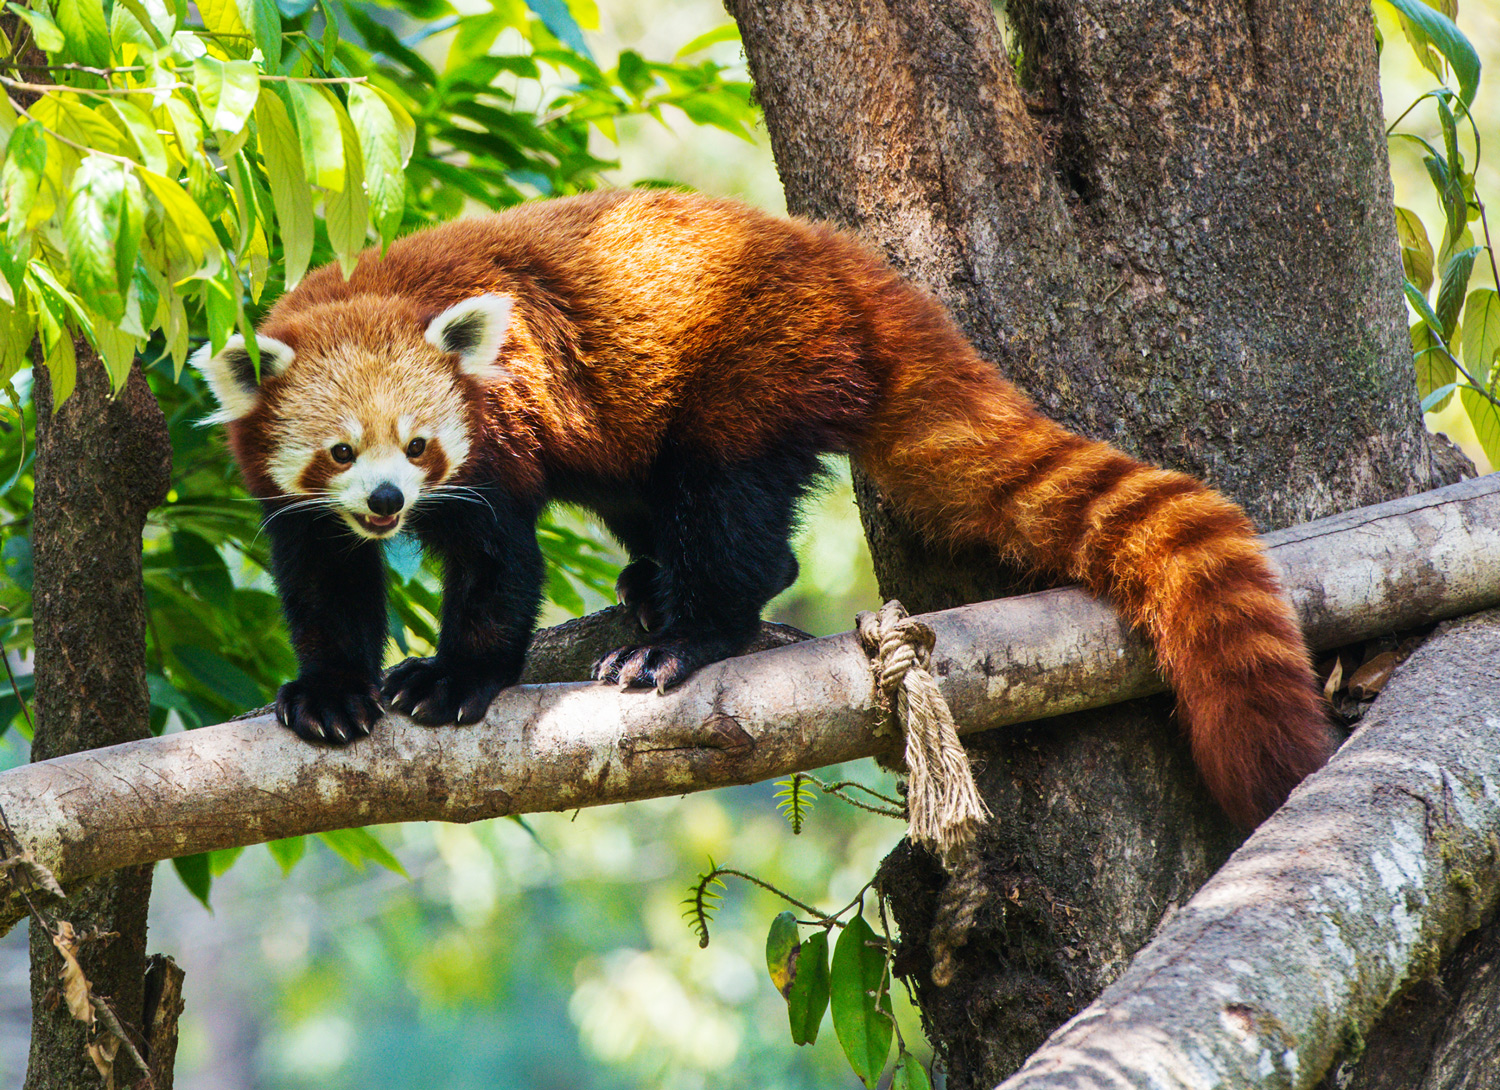 A red and white, raccoon-like animal stands on a tree branch.